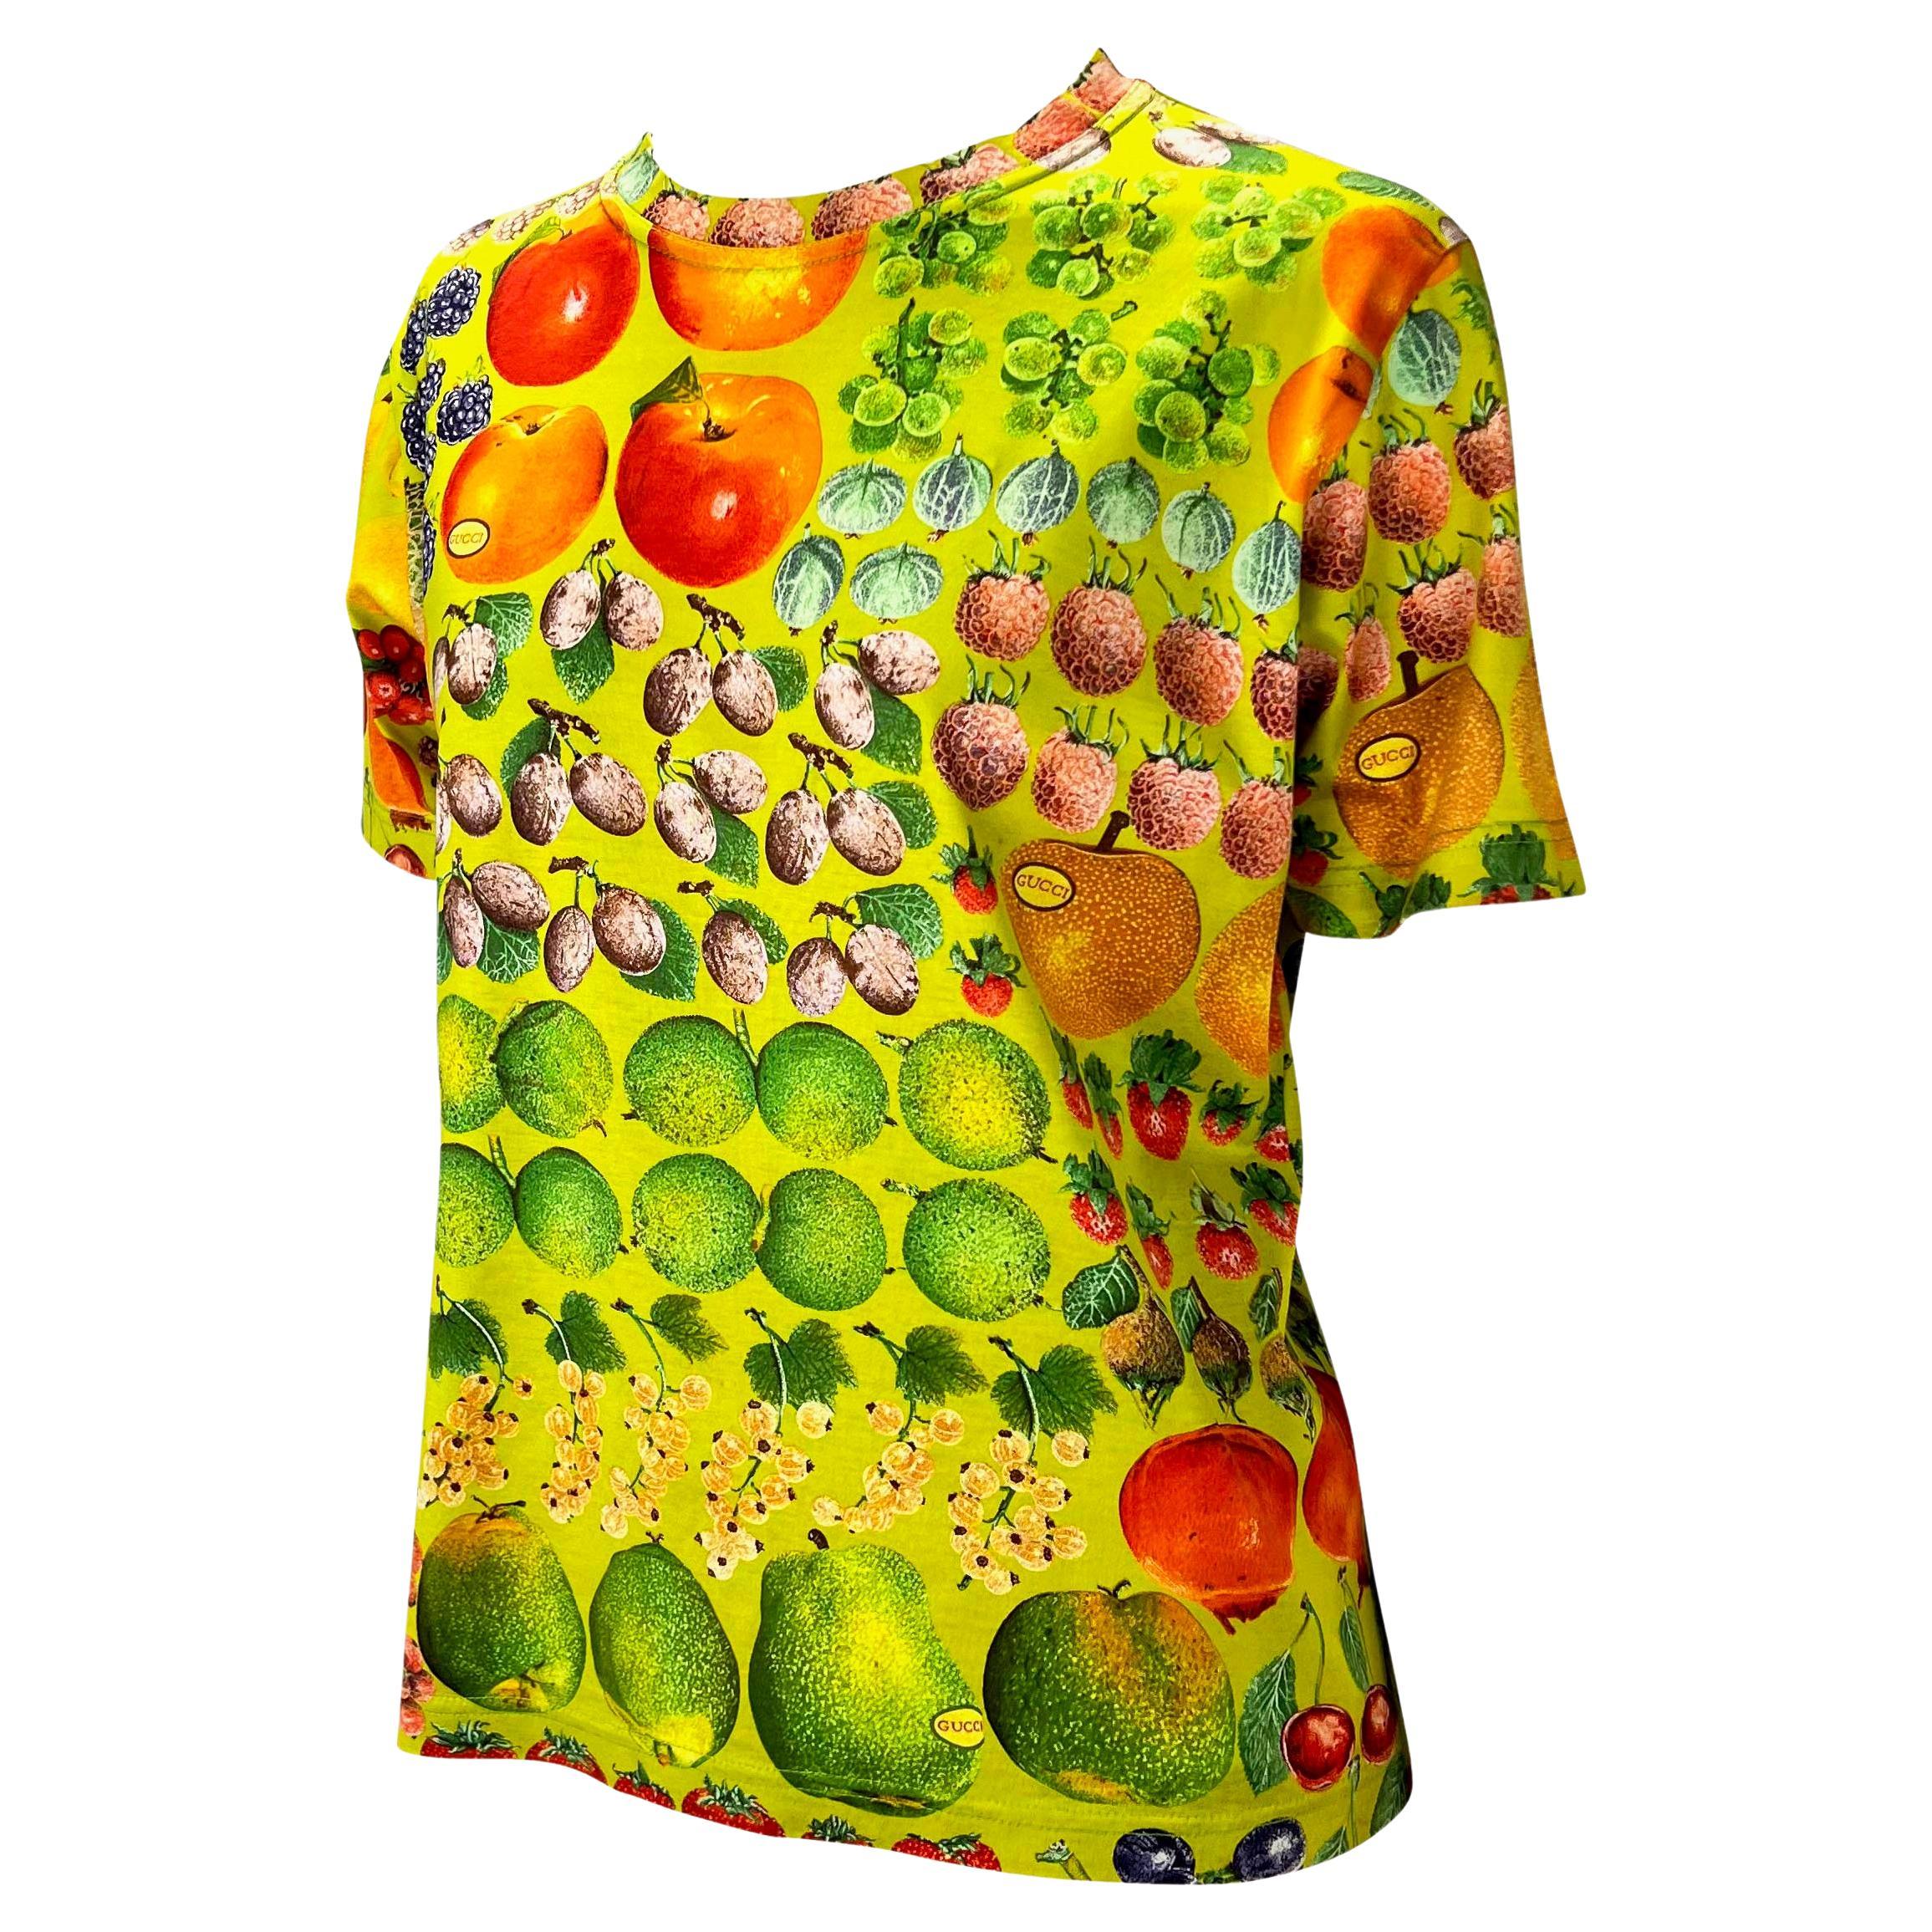 Yellow S/S 1996 Gucci by Tom Ford Fruit Print Botanic Green Cotton T-Shirt For Sale